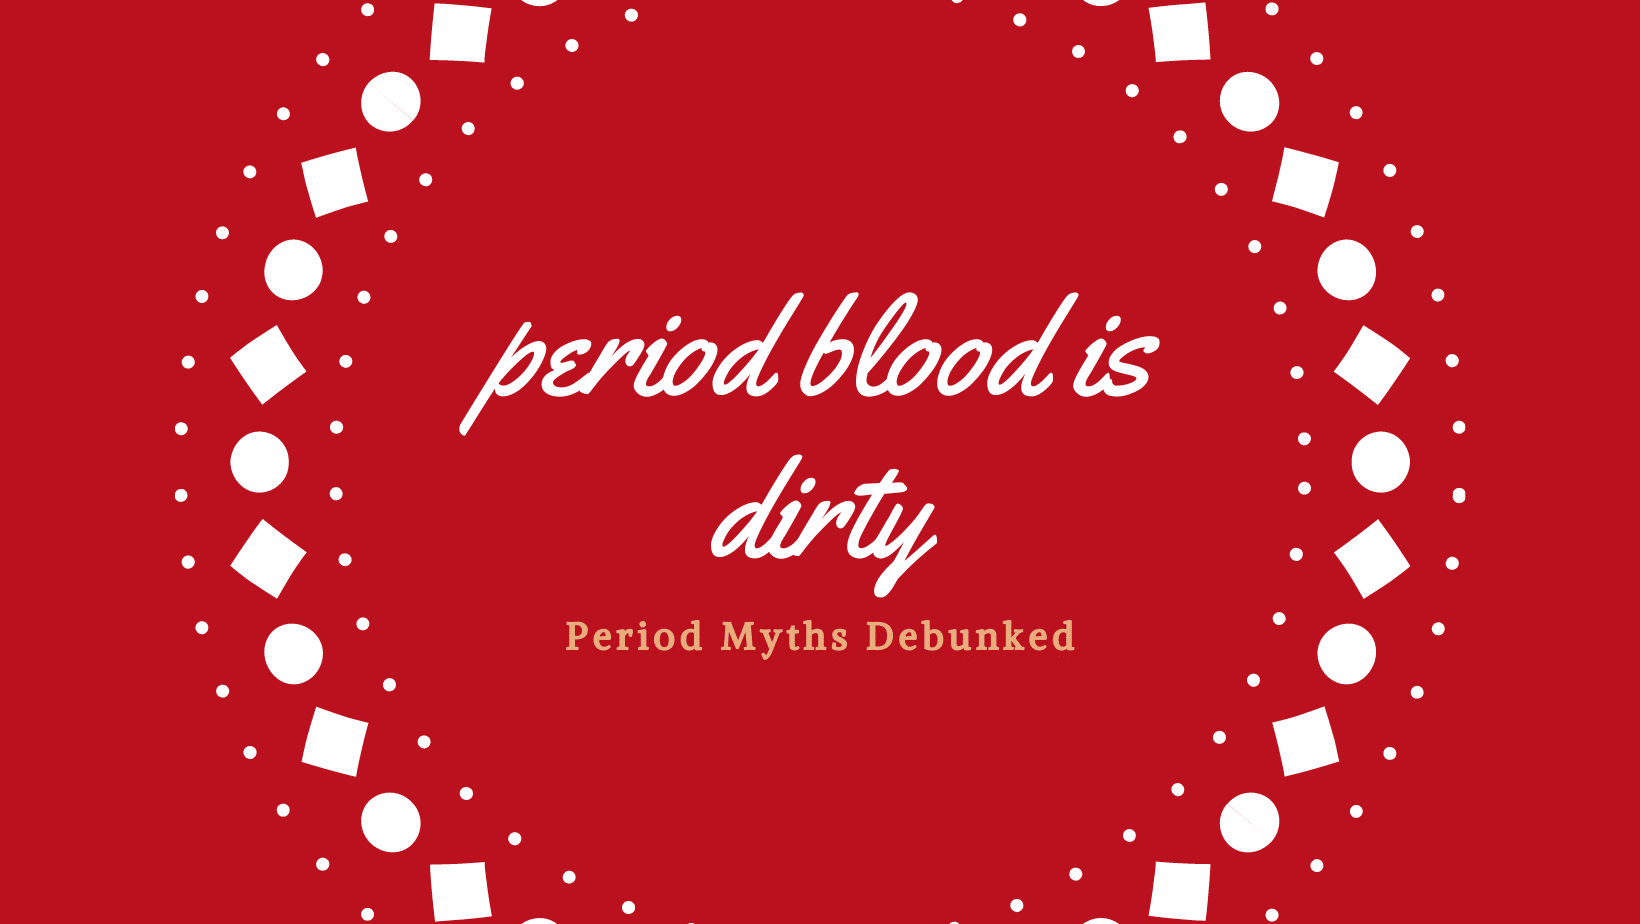 Graphic about debunking period myths that period blood is dirty.